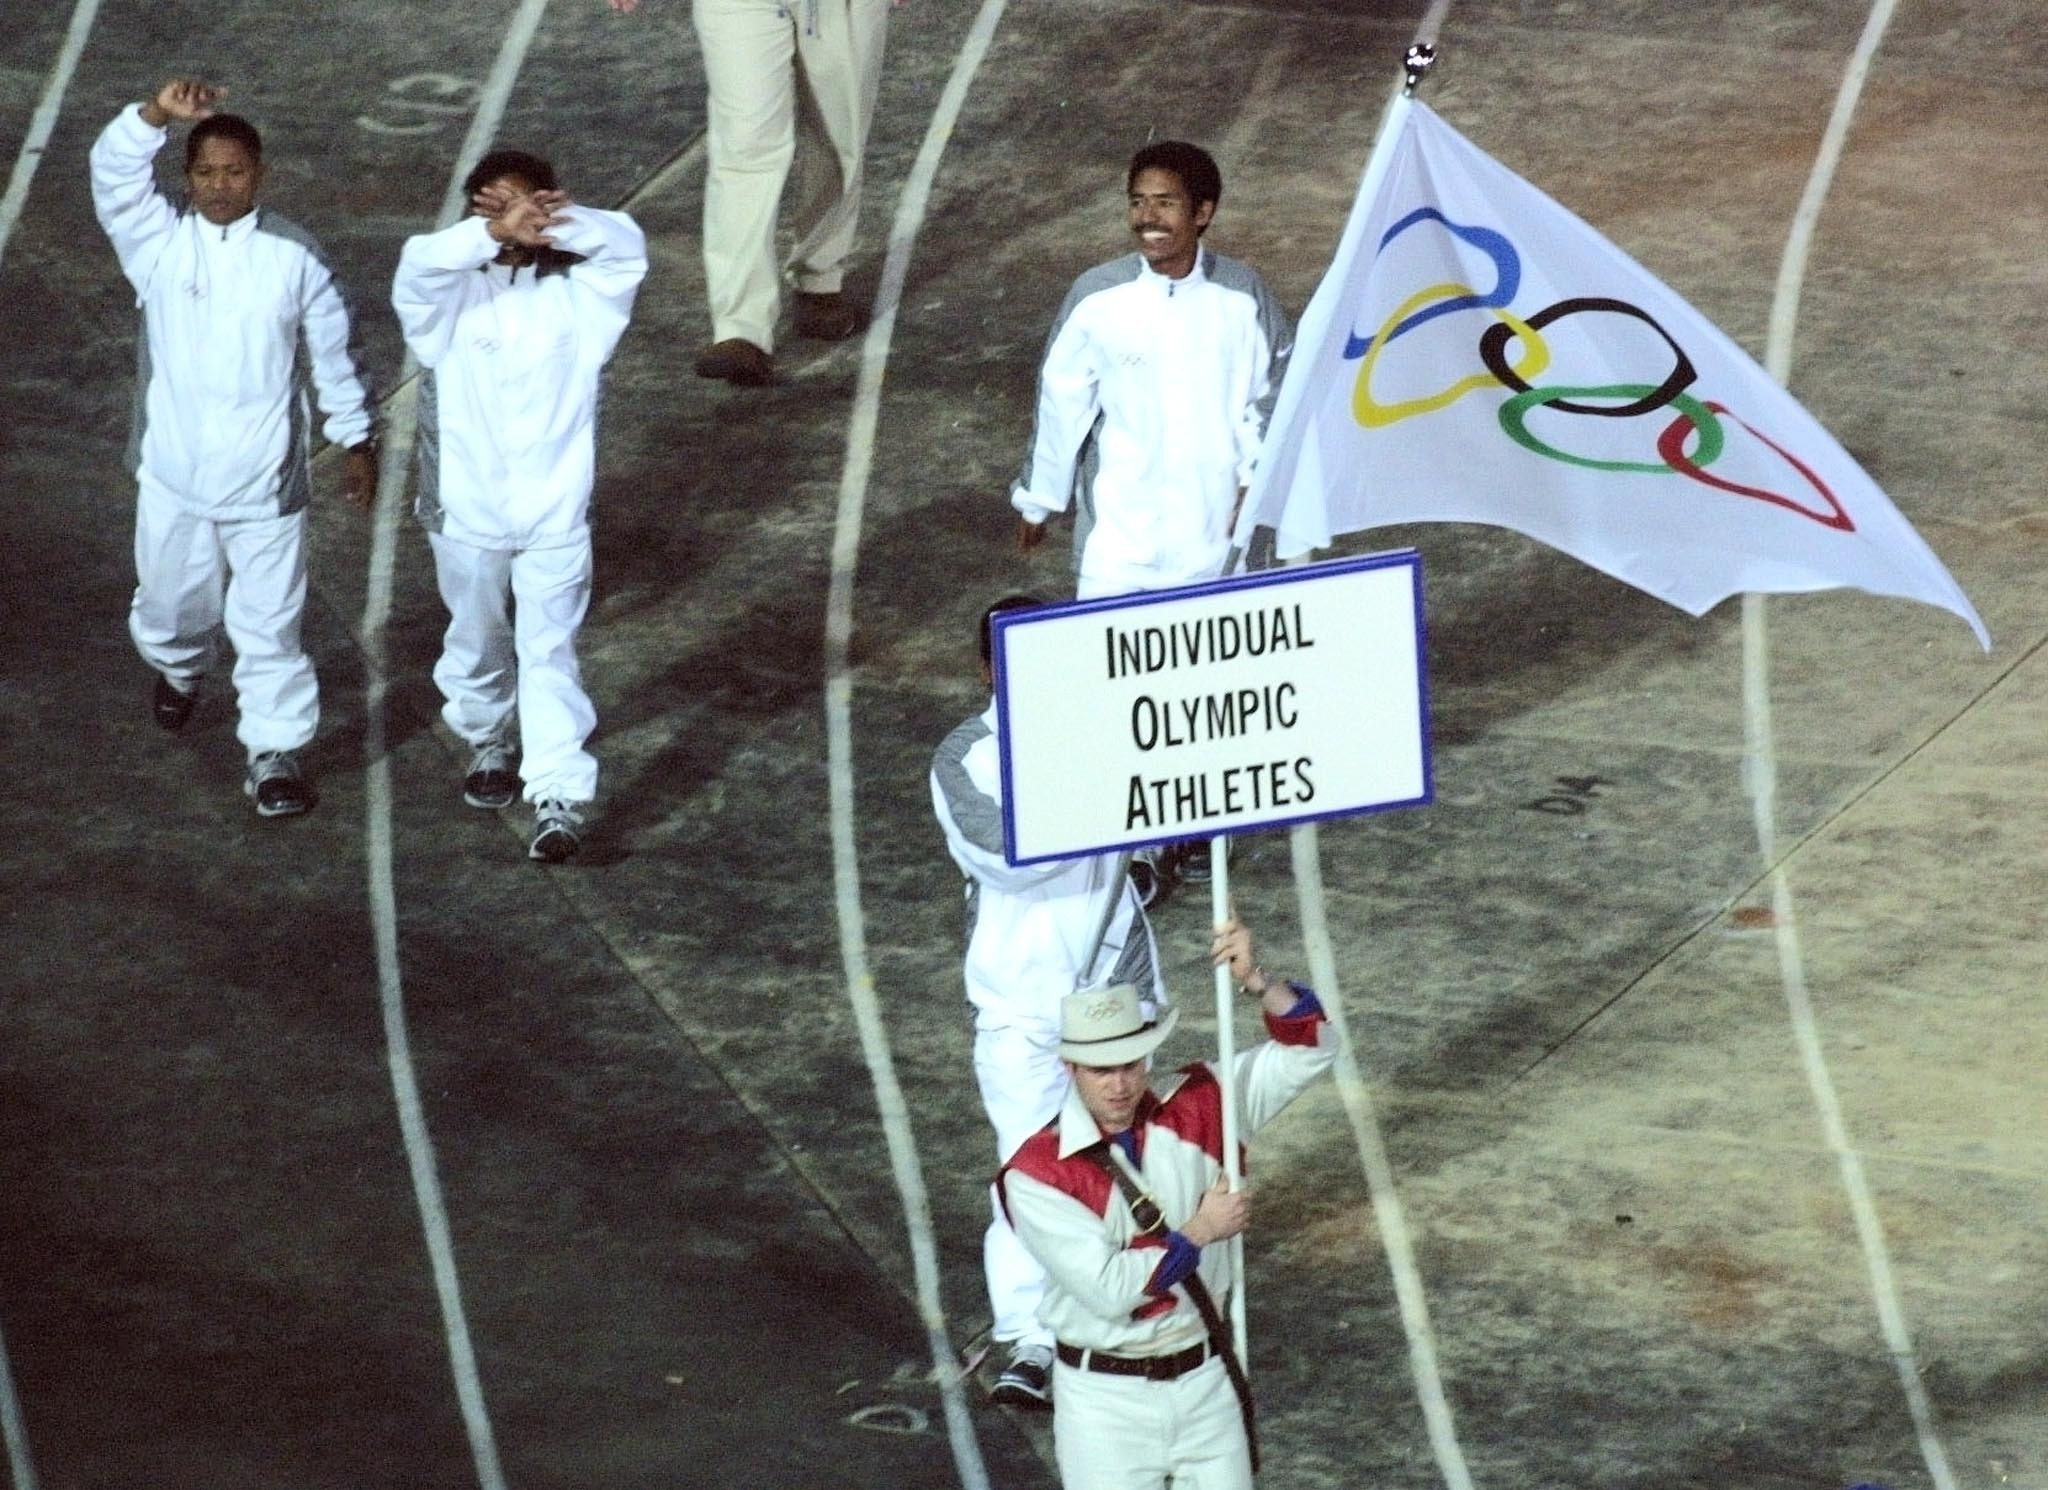 Athletes from East Timor march during the Sydney 2000 Olympic Games Opening Ceremony, where they competed as Individual Olympic Athletes ©Getty Images